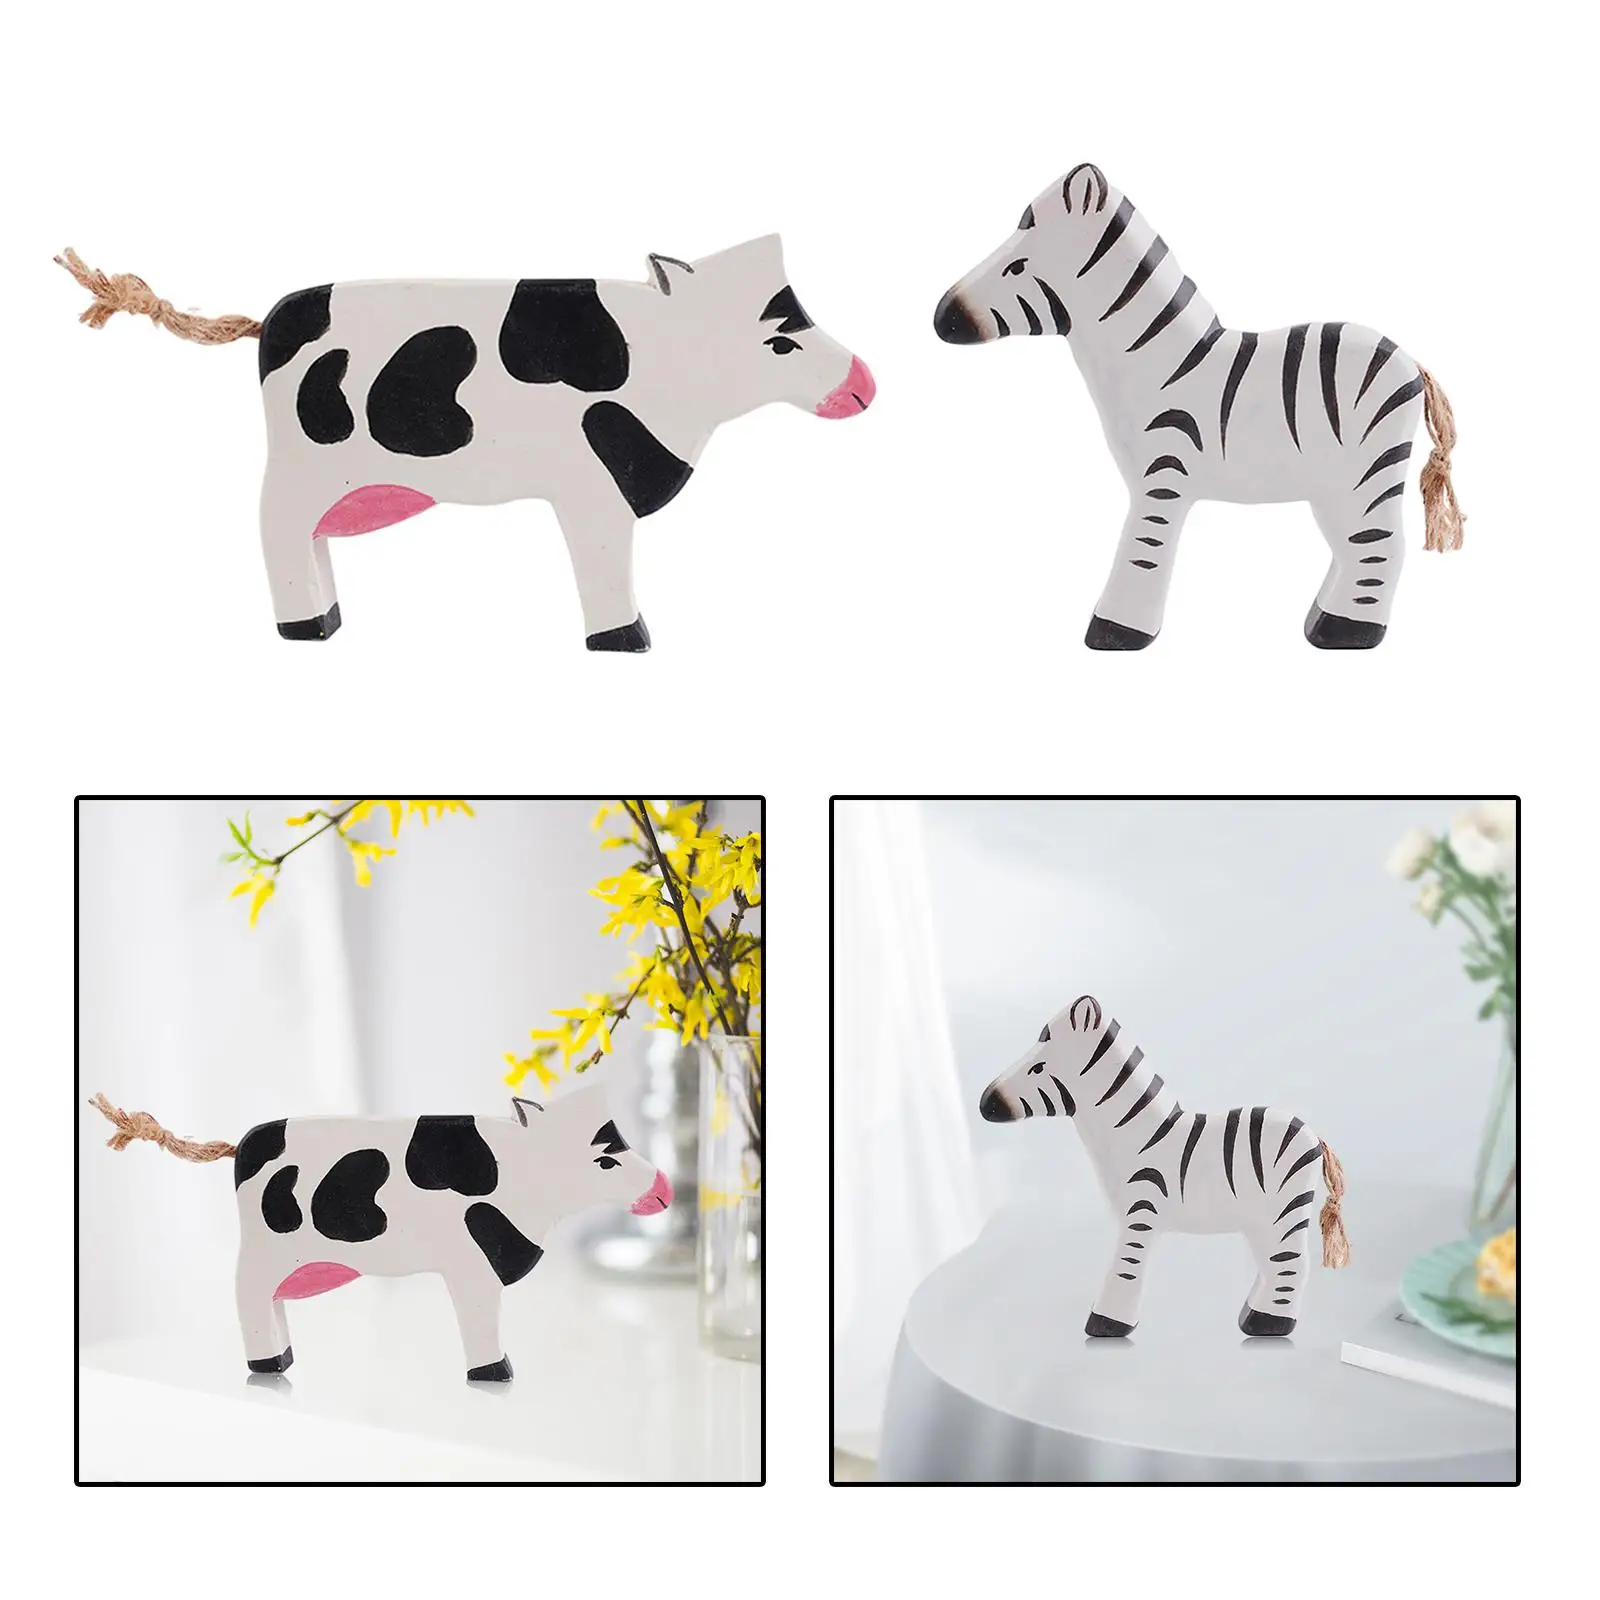 2x Simulation Animal Learning Toys Figurines Figures Model Collection Animal Playset for Kids Children Toddlers Boys Girls